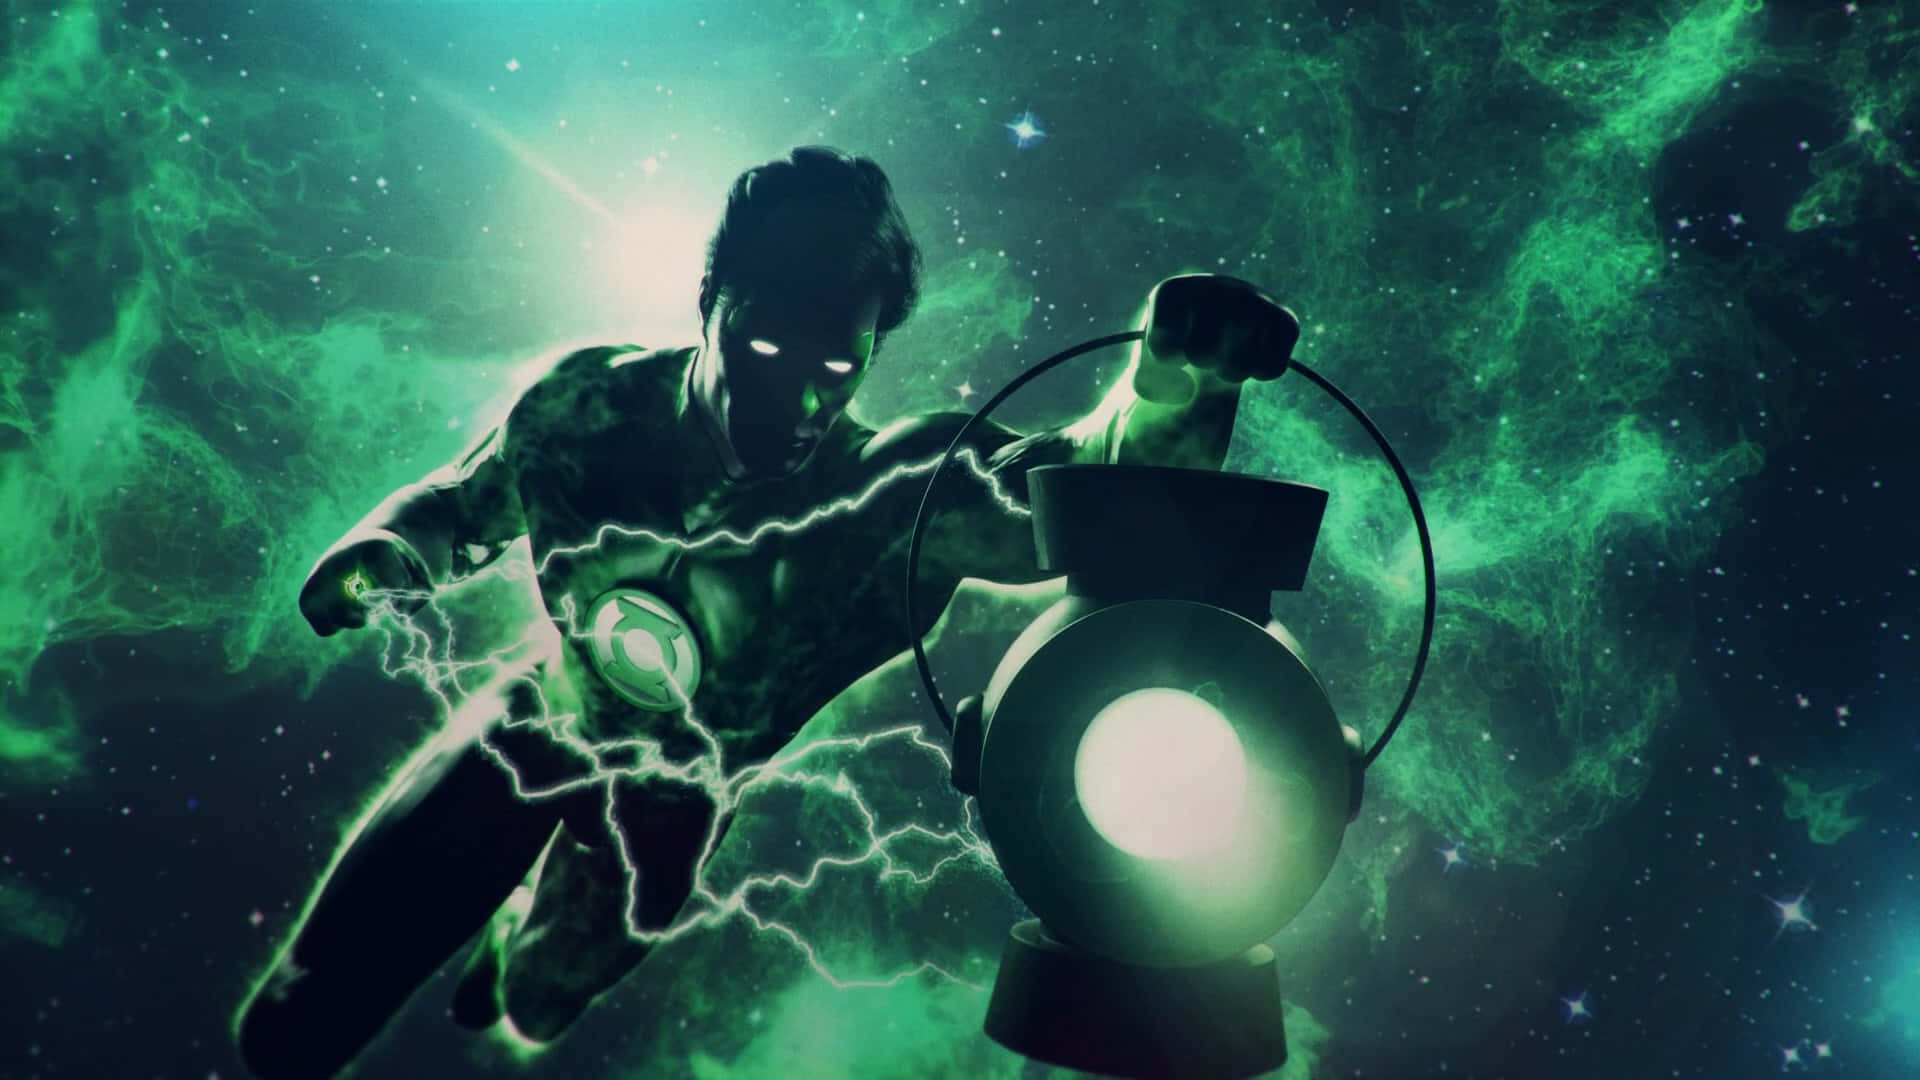 Power of Will: The Majestic Green Lantern